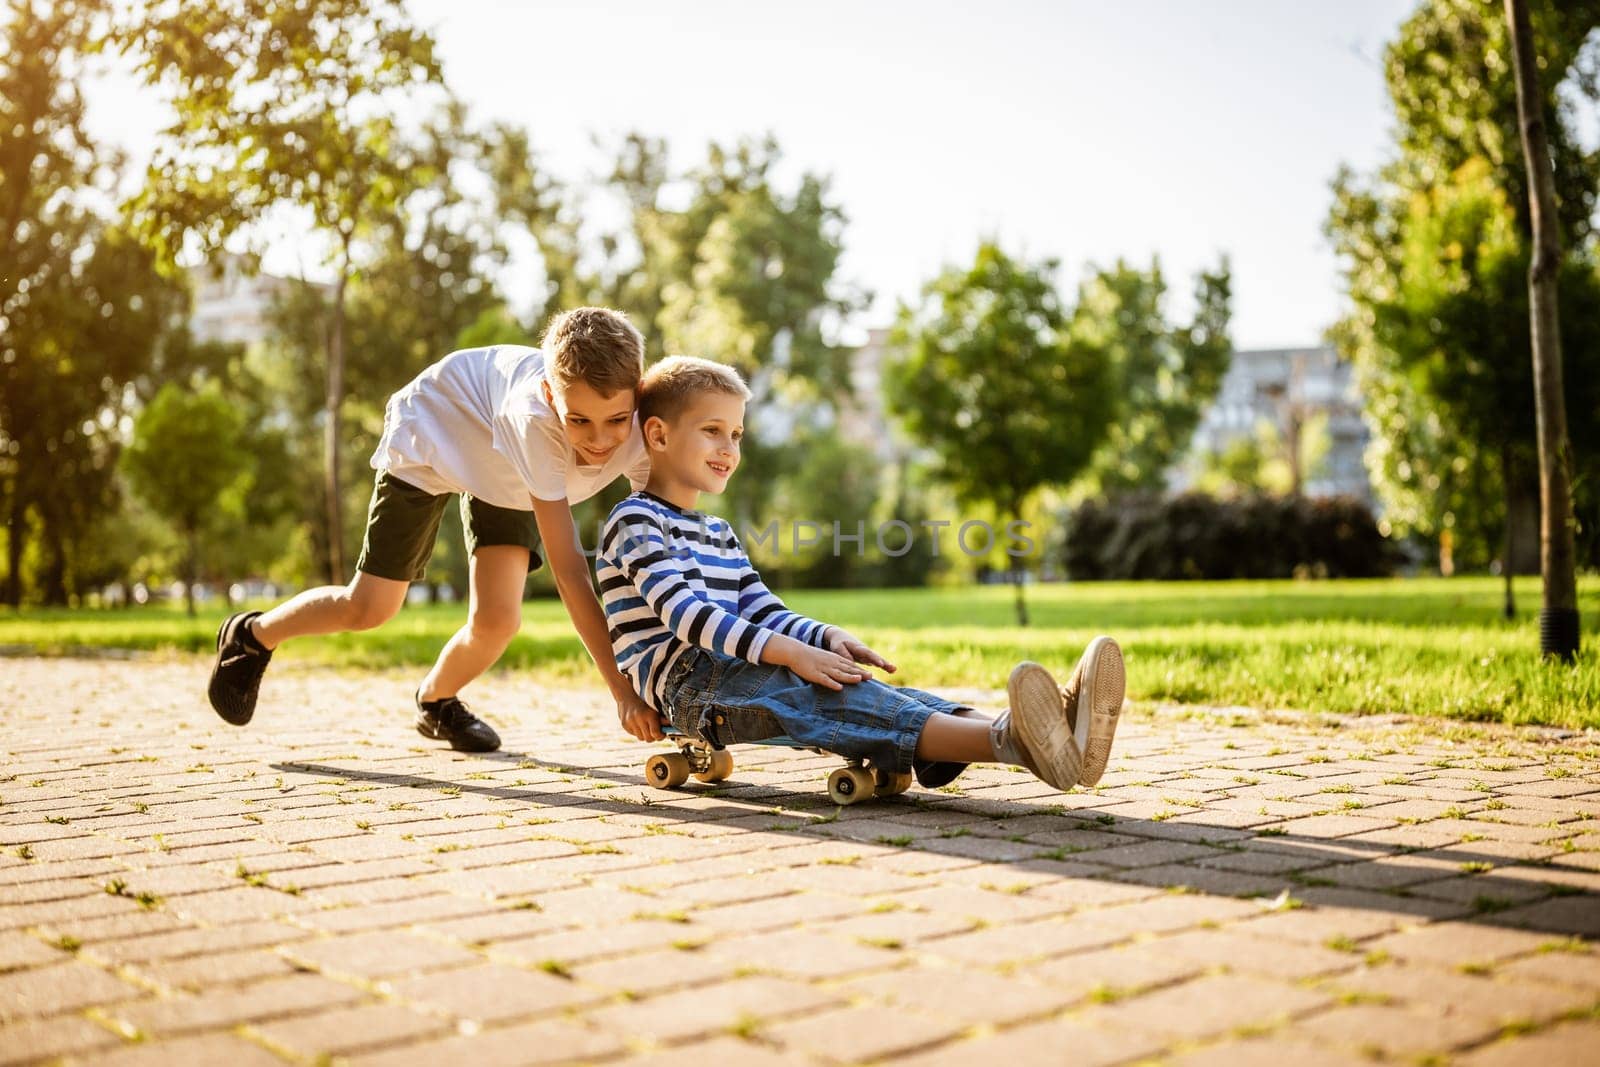 Two boys are having fun with skateboard in park. Playful children in park, happy childhood.